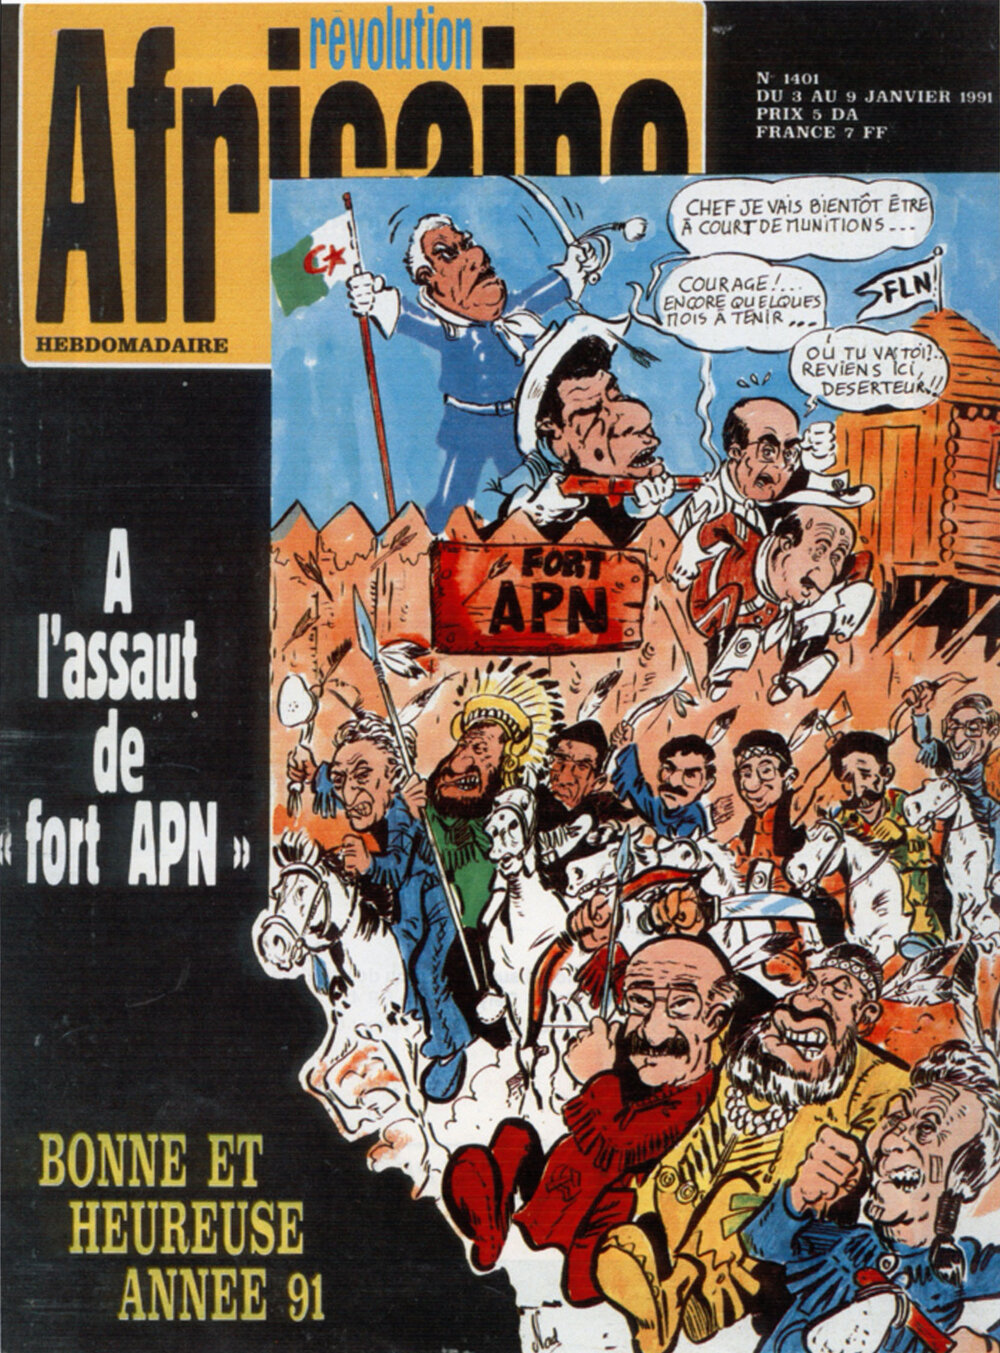 Revolution Africaine  <p>My 1991 cover comparing Algeria’s multi-party elections to Native American attacks on the US cavalry holed up in their forts, the latter embodied by then President Chadli Bendjedid.</p>